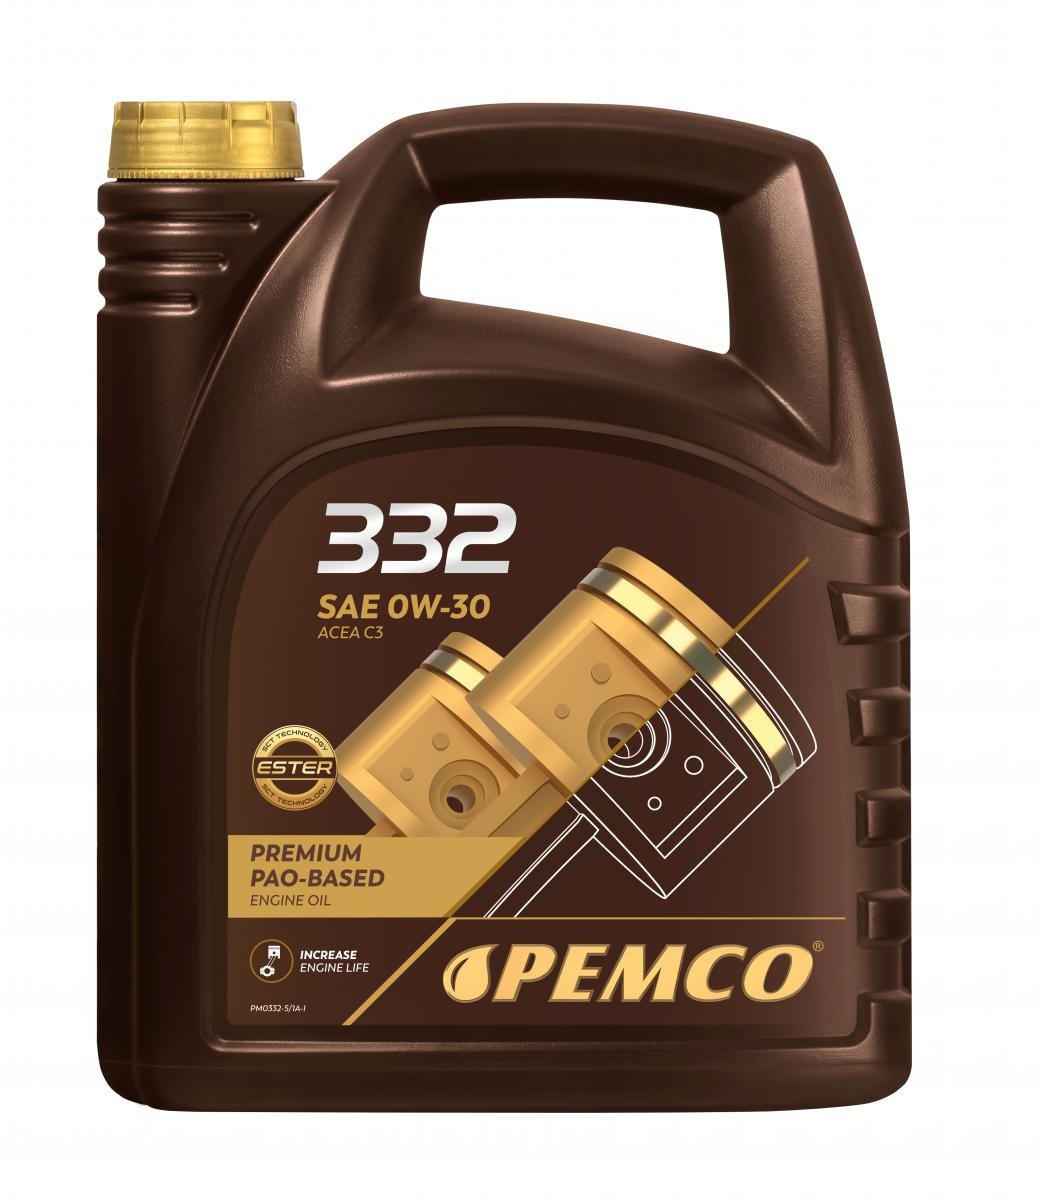 Order PSA B71 2312 engine oil from AUTODOC at low prices